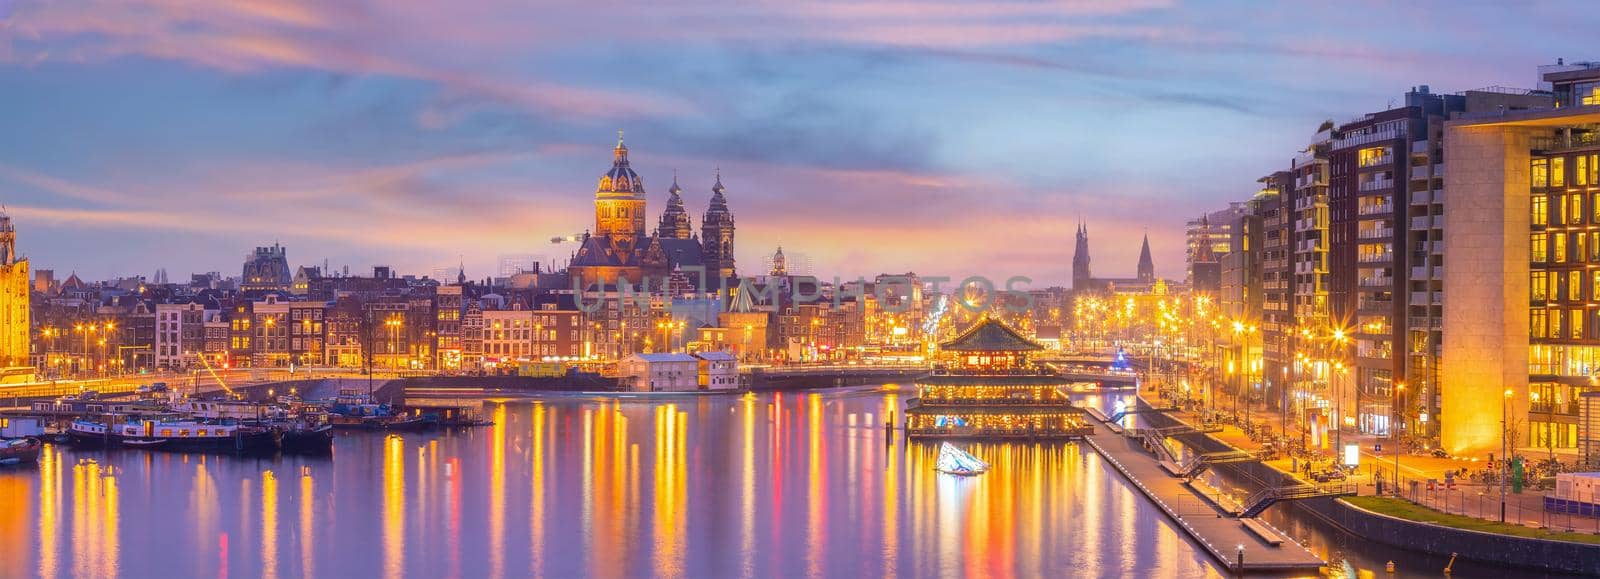 Amsterdam downtown city skyline cityscape of Netherlands at sunset